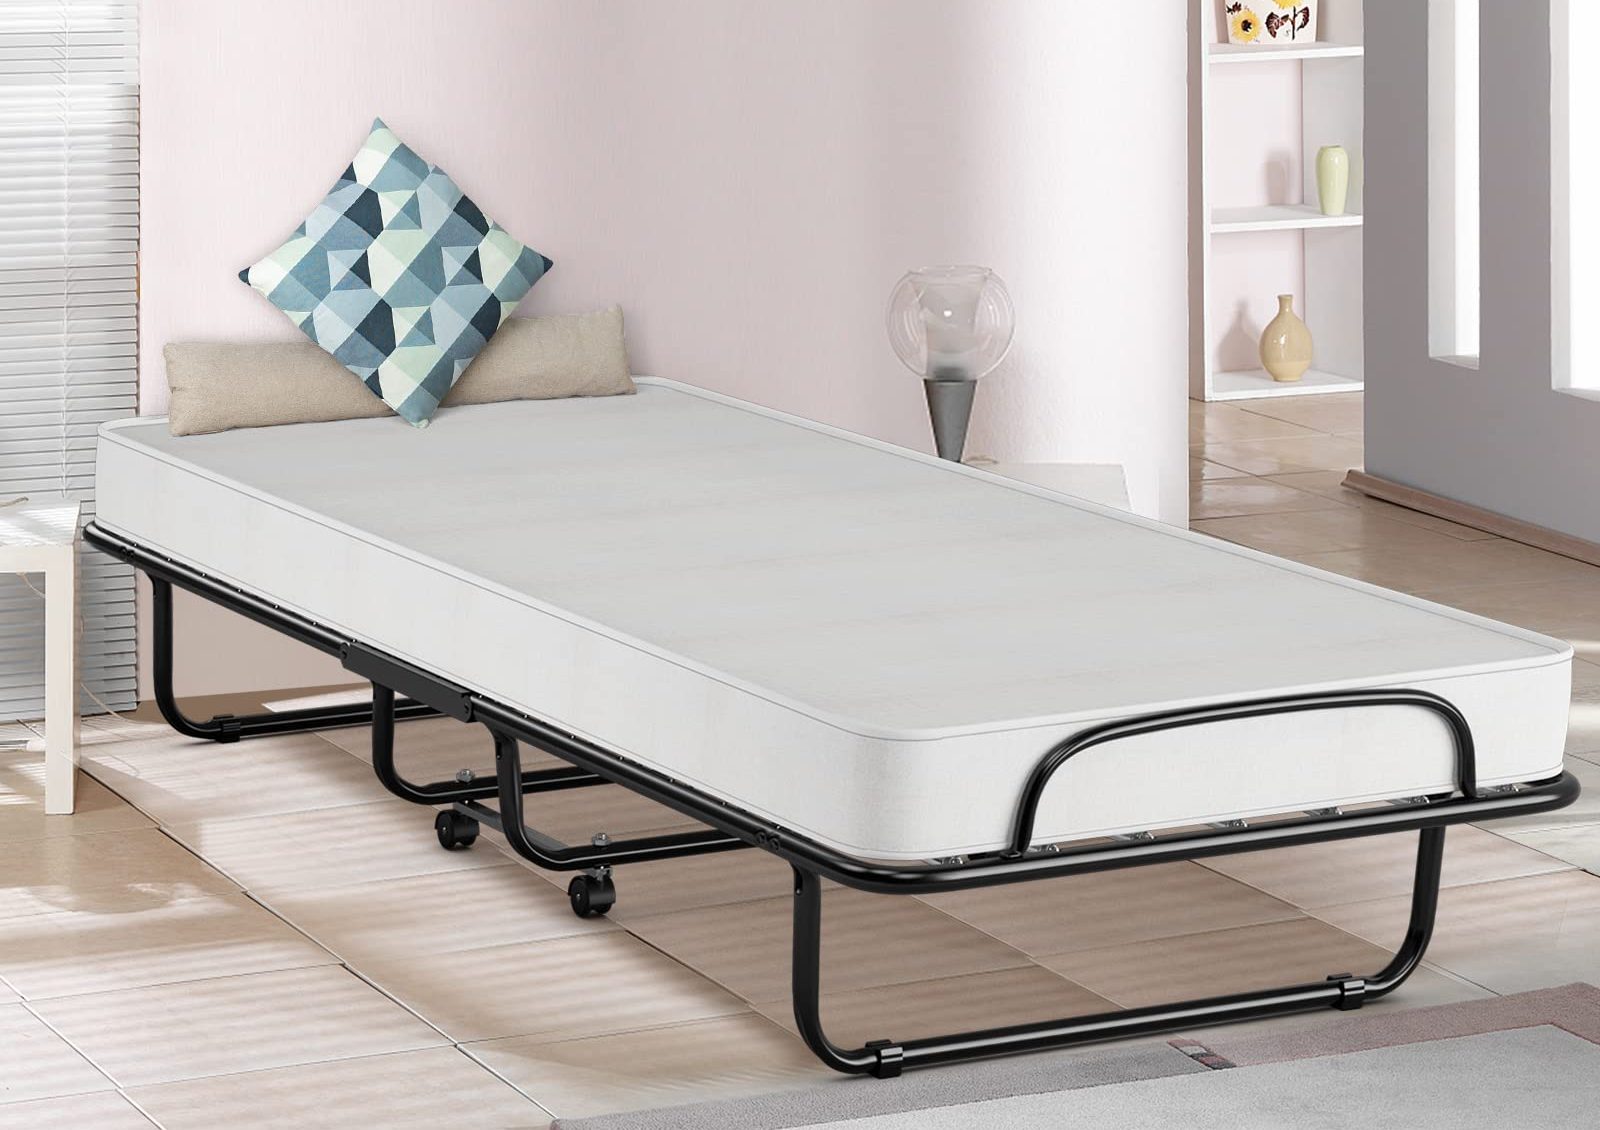 best rollaway portable bed reviews